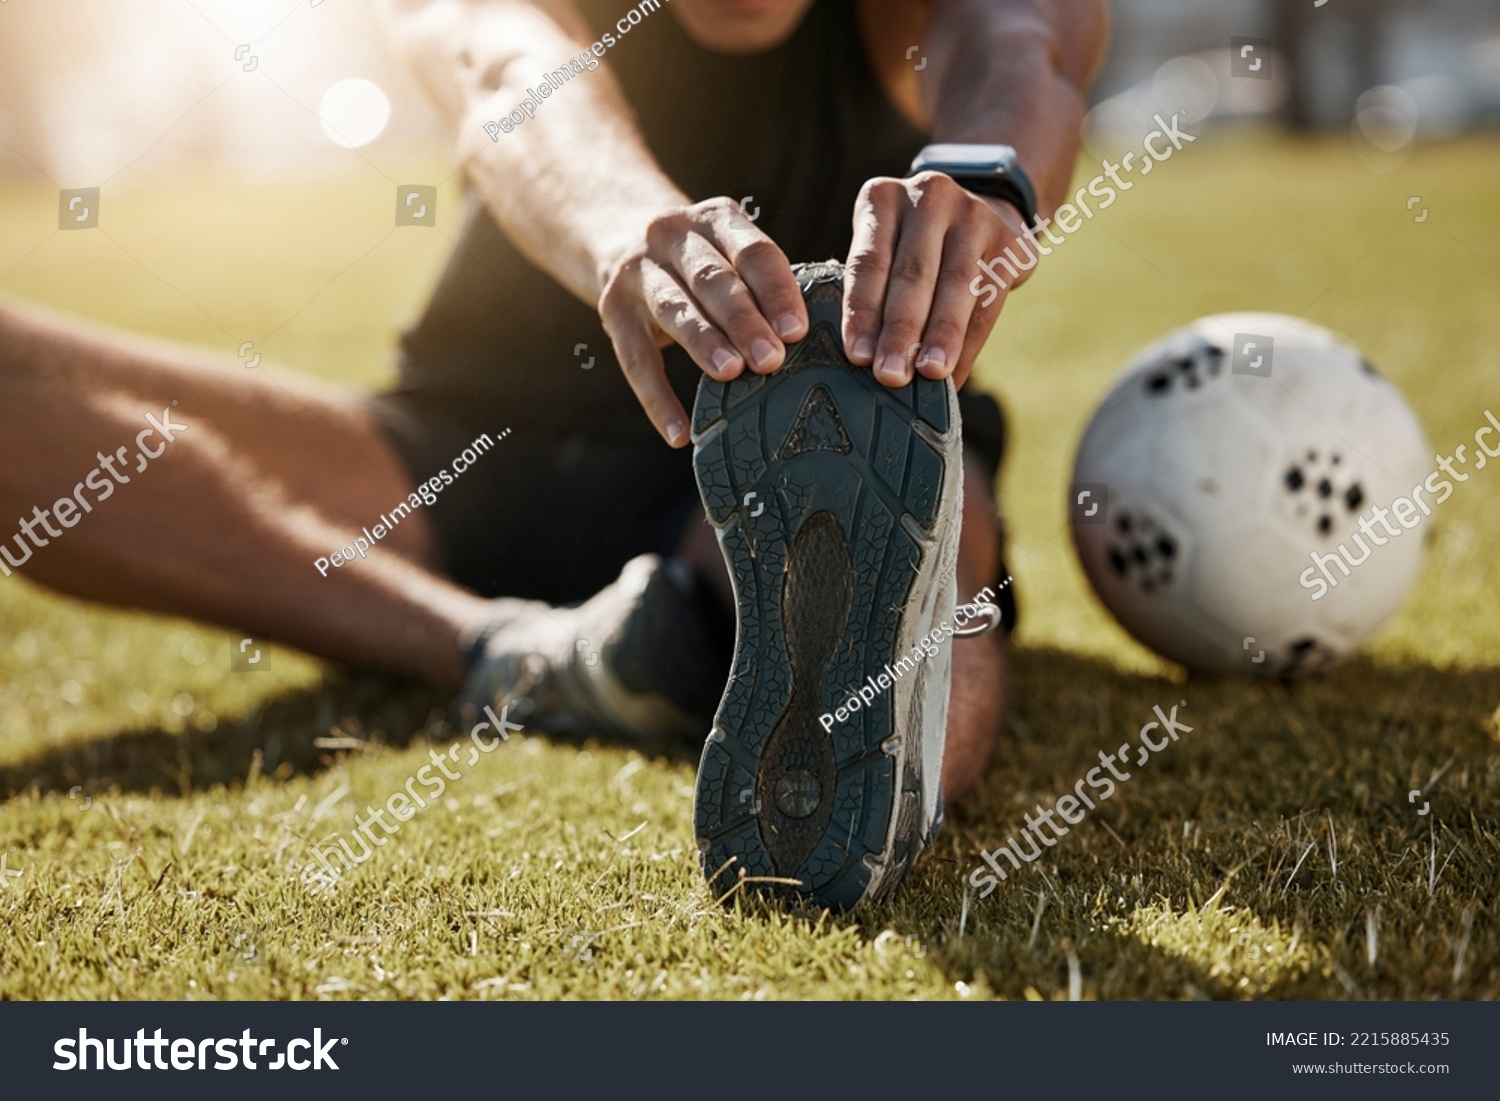 Stretching, foot and soccer man on field for sports training, exercise wellness or legs muscle health. Professional football person with sneakers or shoes for game warmup, workout outdoor on a pitch #2215885435